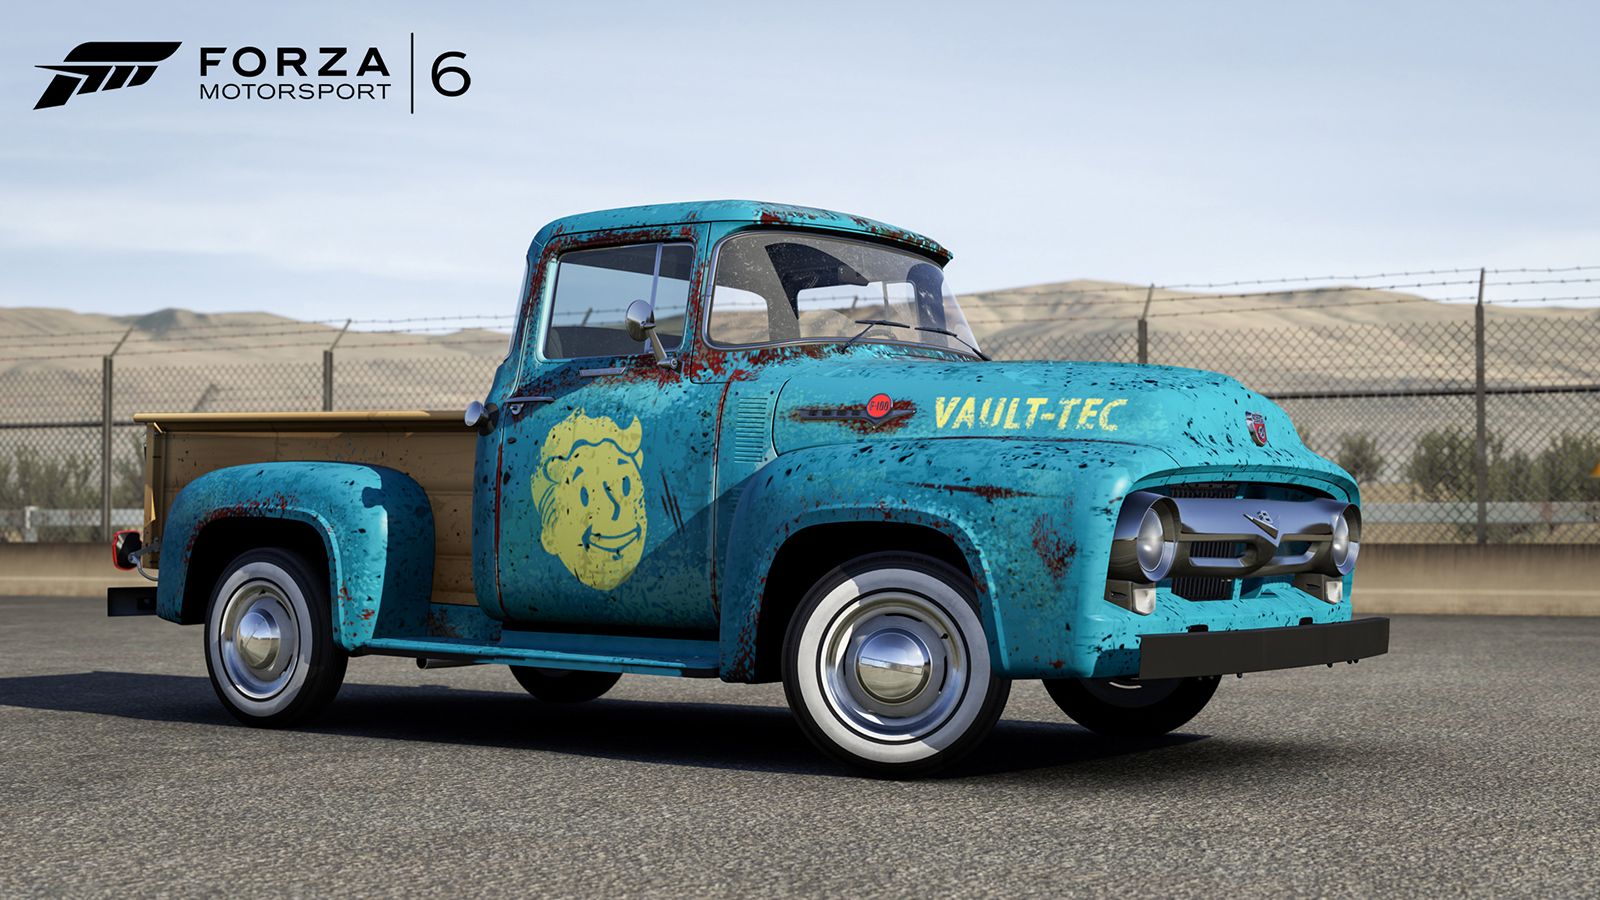 drive fallout 4 cars in forza motorsport 6 image 1